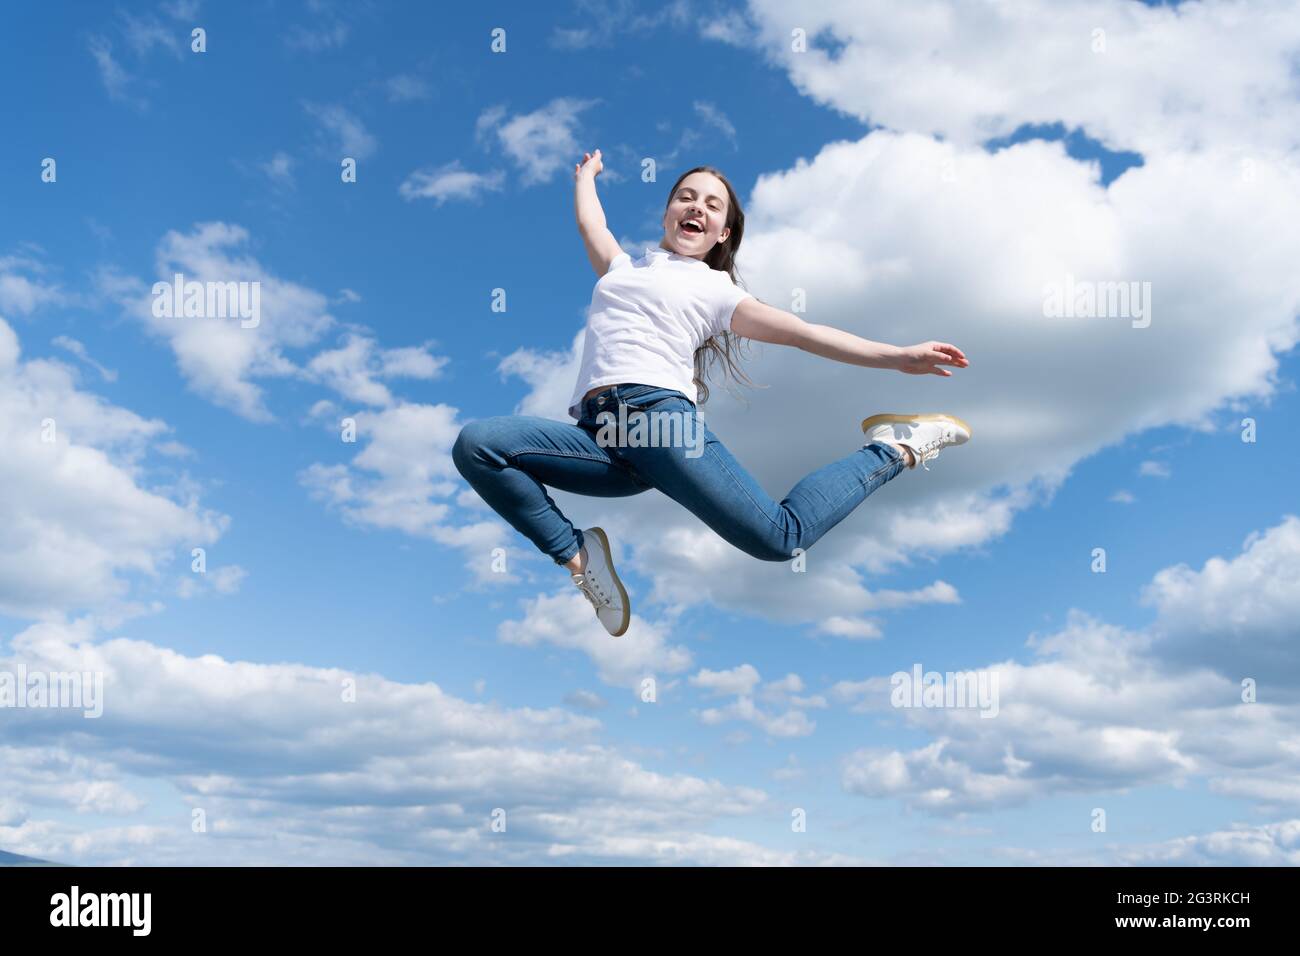 Young and free. future of sport. outdoor activity. healthy child jumping outdoor. kid full of energy Stock Photo